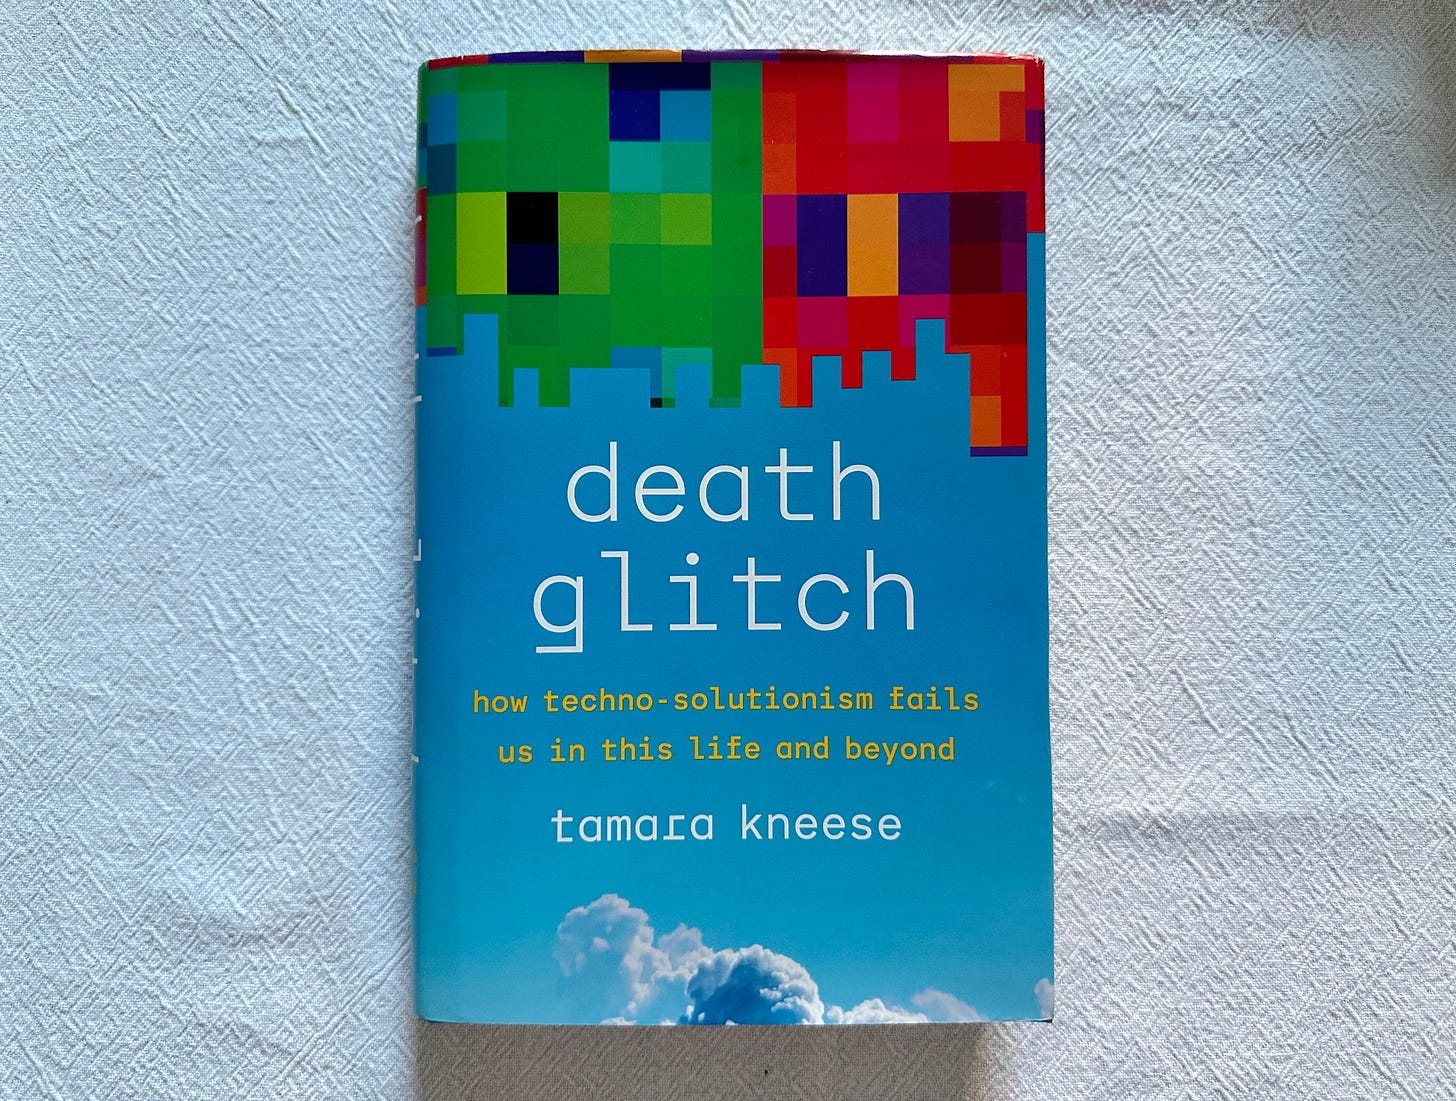 Image of the book "Death Glitch" by Tamara Kneese on a white tablecloth. The cover of the book is bright blue with a green and red pixelated pattern that appears to be falling from the top of the cover.